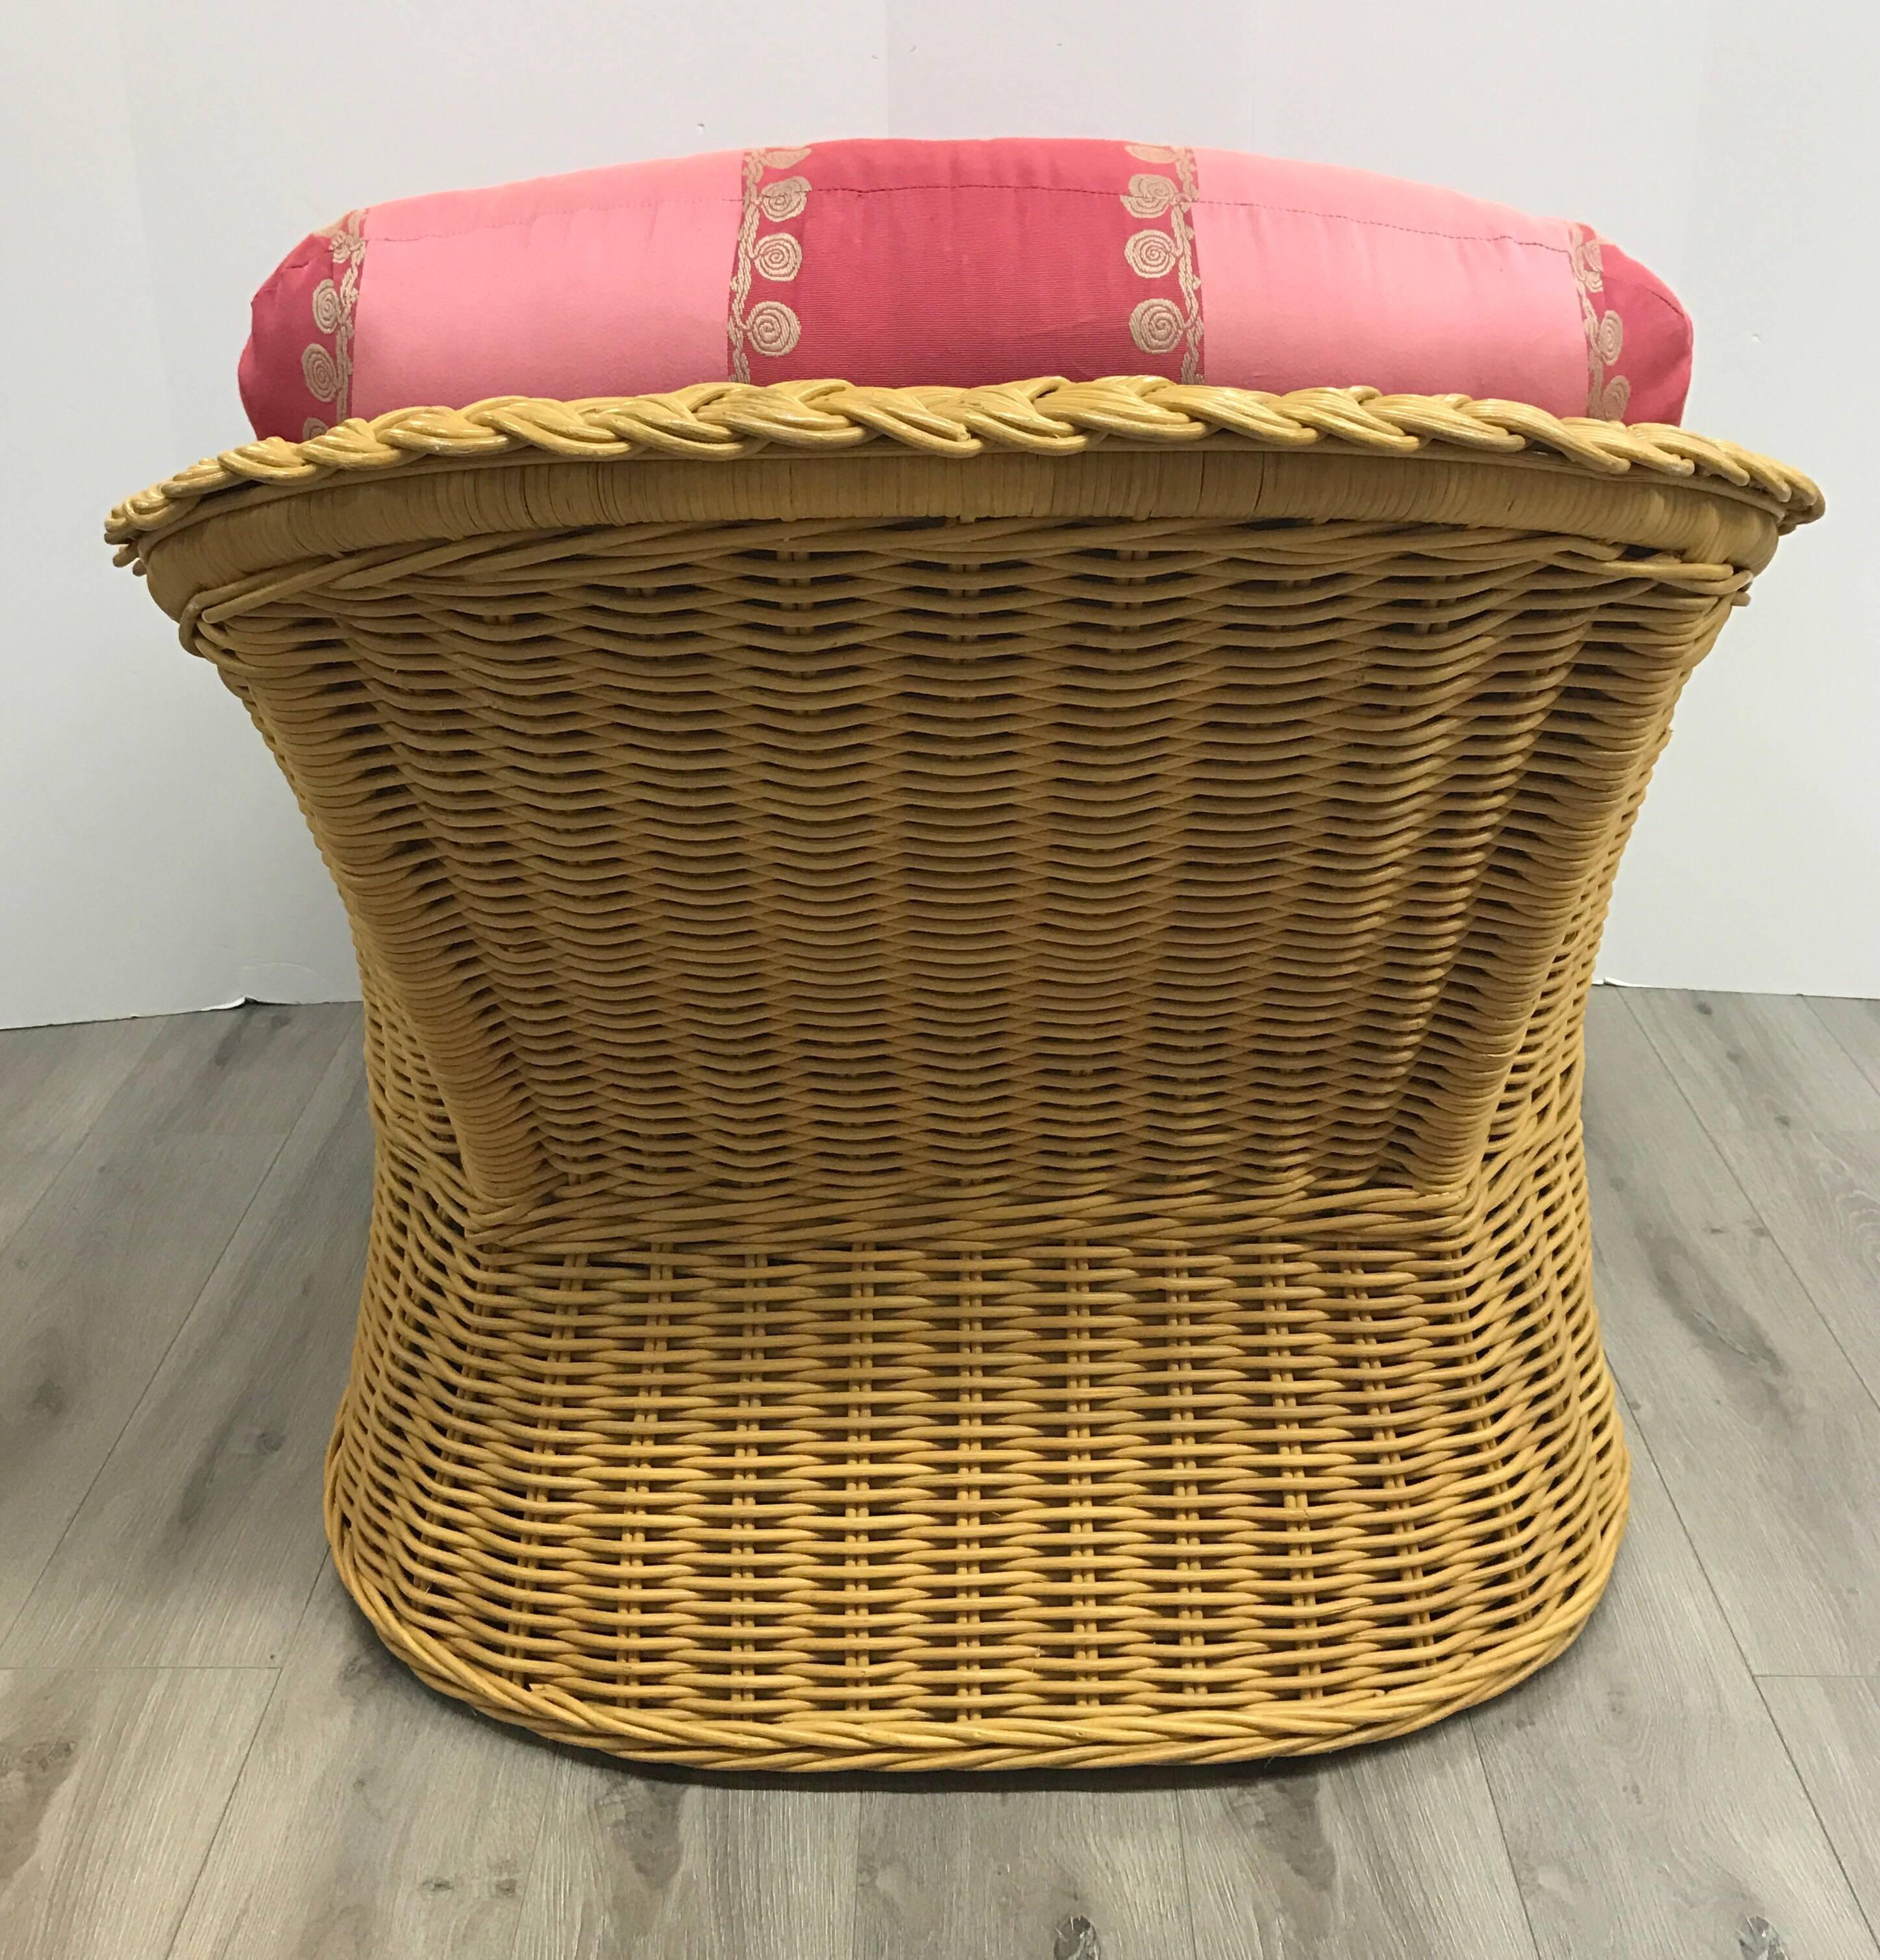 American Mid-Century Modern Pink Rasberry Wicker Lounge Chair and Ottoman